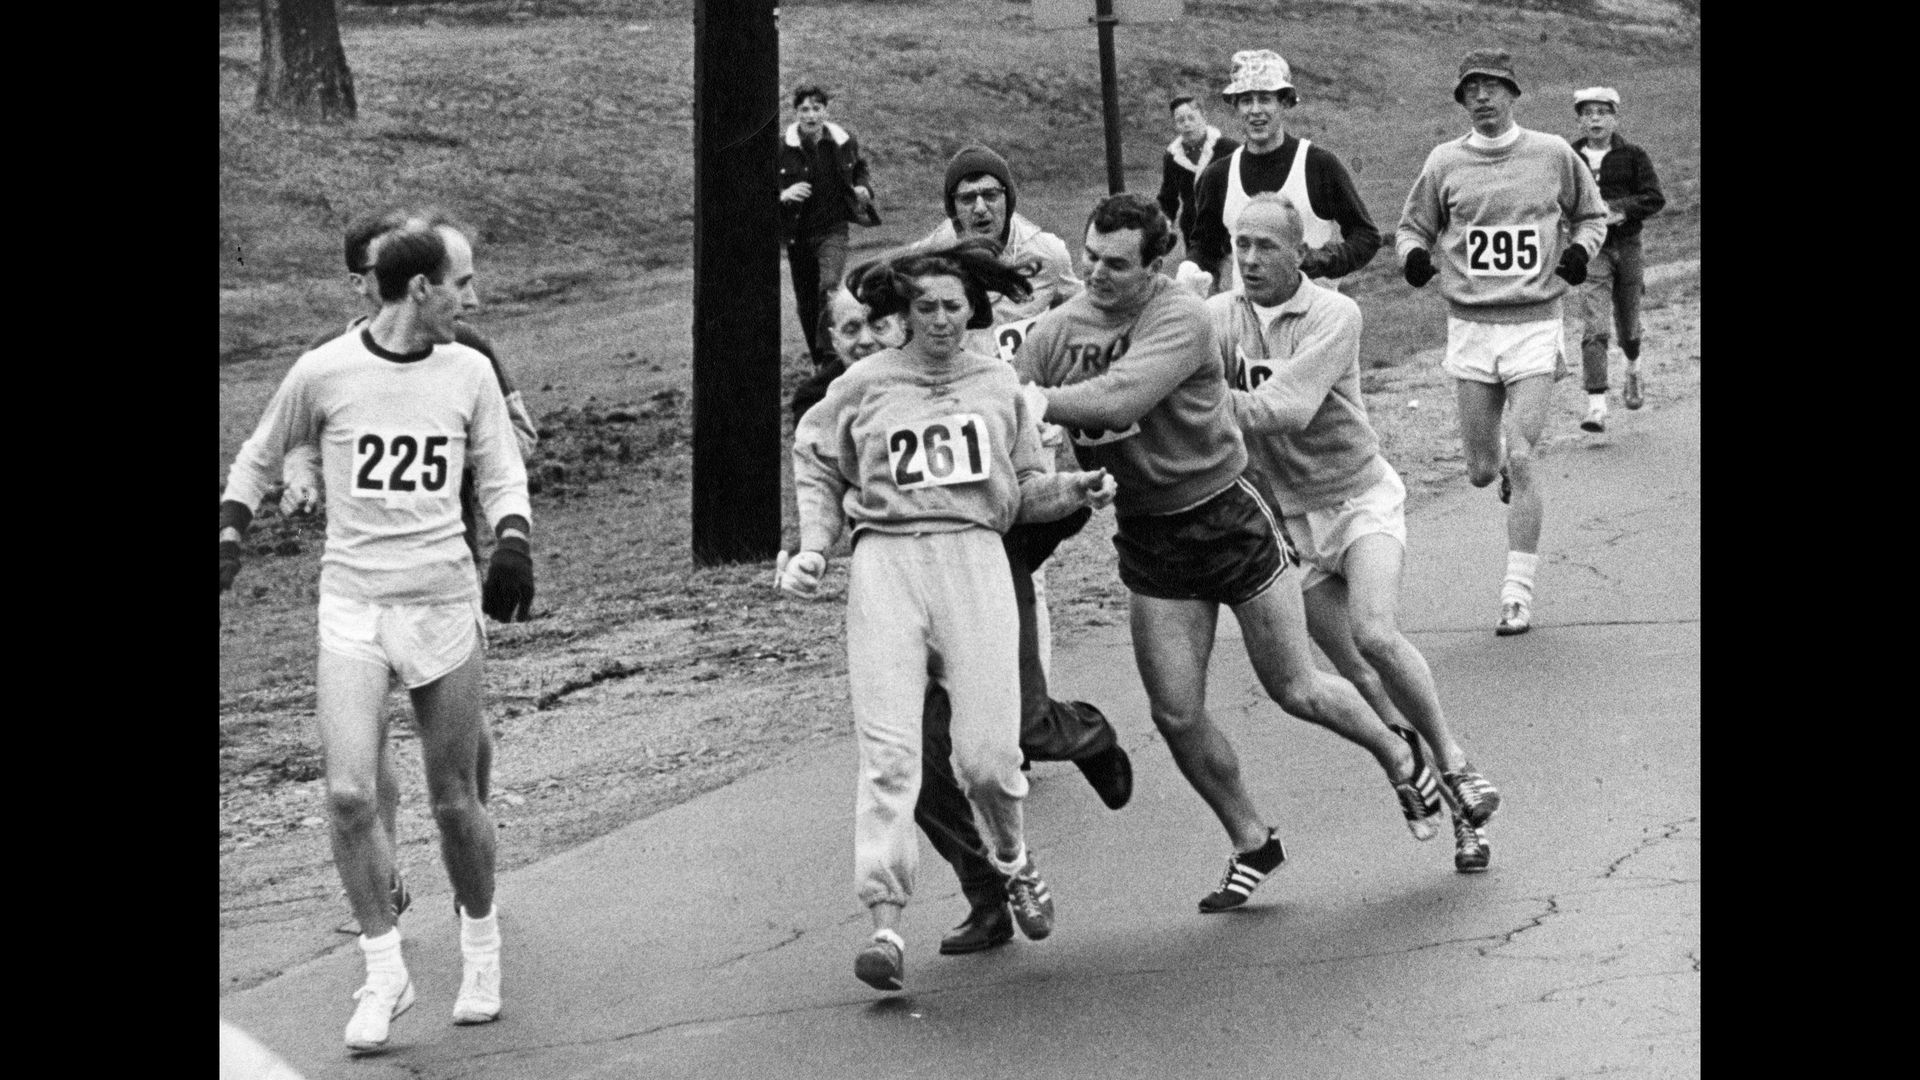 Officials tried to remove Katherine Switzer at the starting line of the 1967 Boston Marathon.